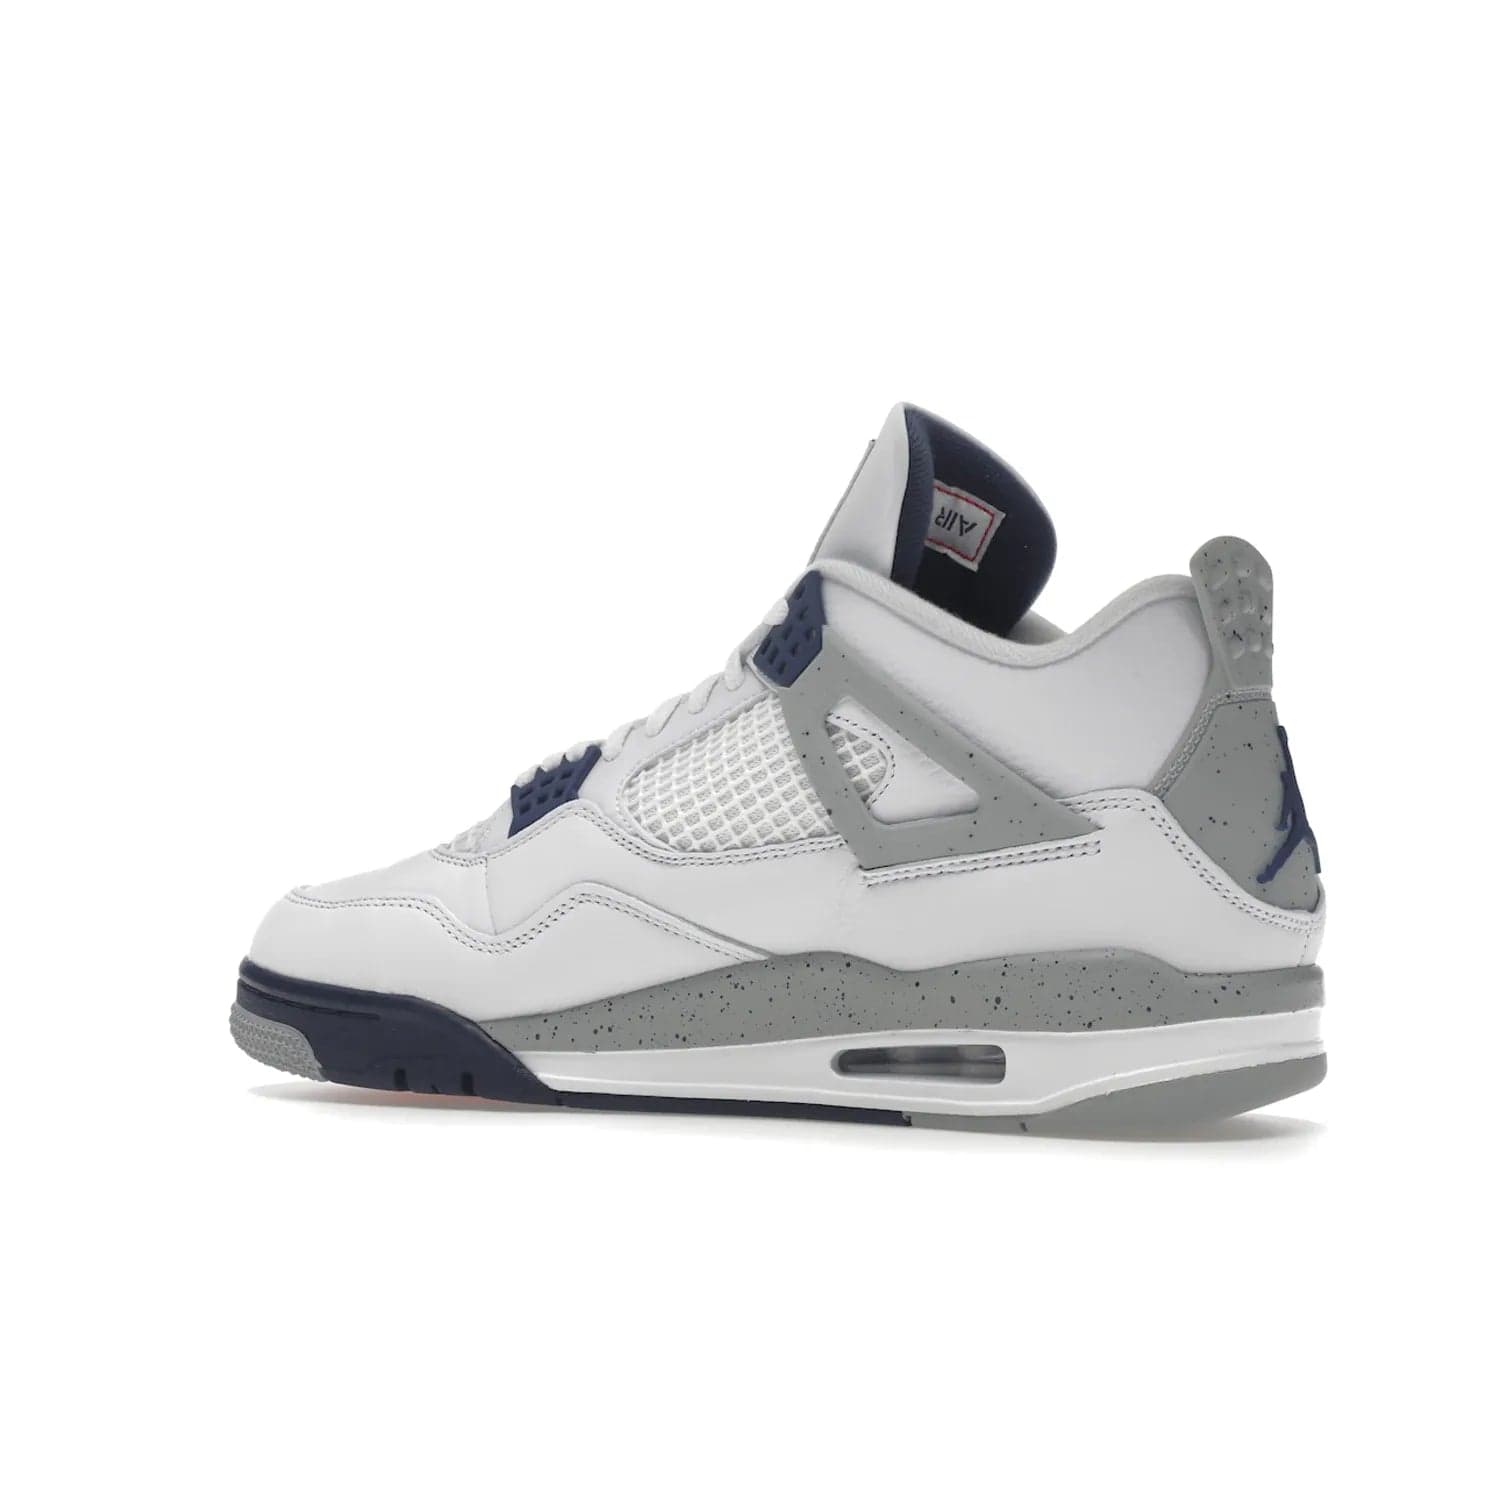 Jordan 4 Retro Midnight Navy - Image 22 - Only at www.BallersClubKickz.com - Shop the Air Jordan Retro 4 White Midnight Navy. Stand out with a classic white leather upper, black support wings, midnight navy eyelets, and Crimson Jumpman tongue tag. Unbeatable comfort with two-tone polyurethane midsole with encapsulated Air technology. Get yours before October 29th, 2022.